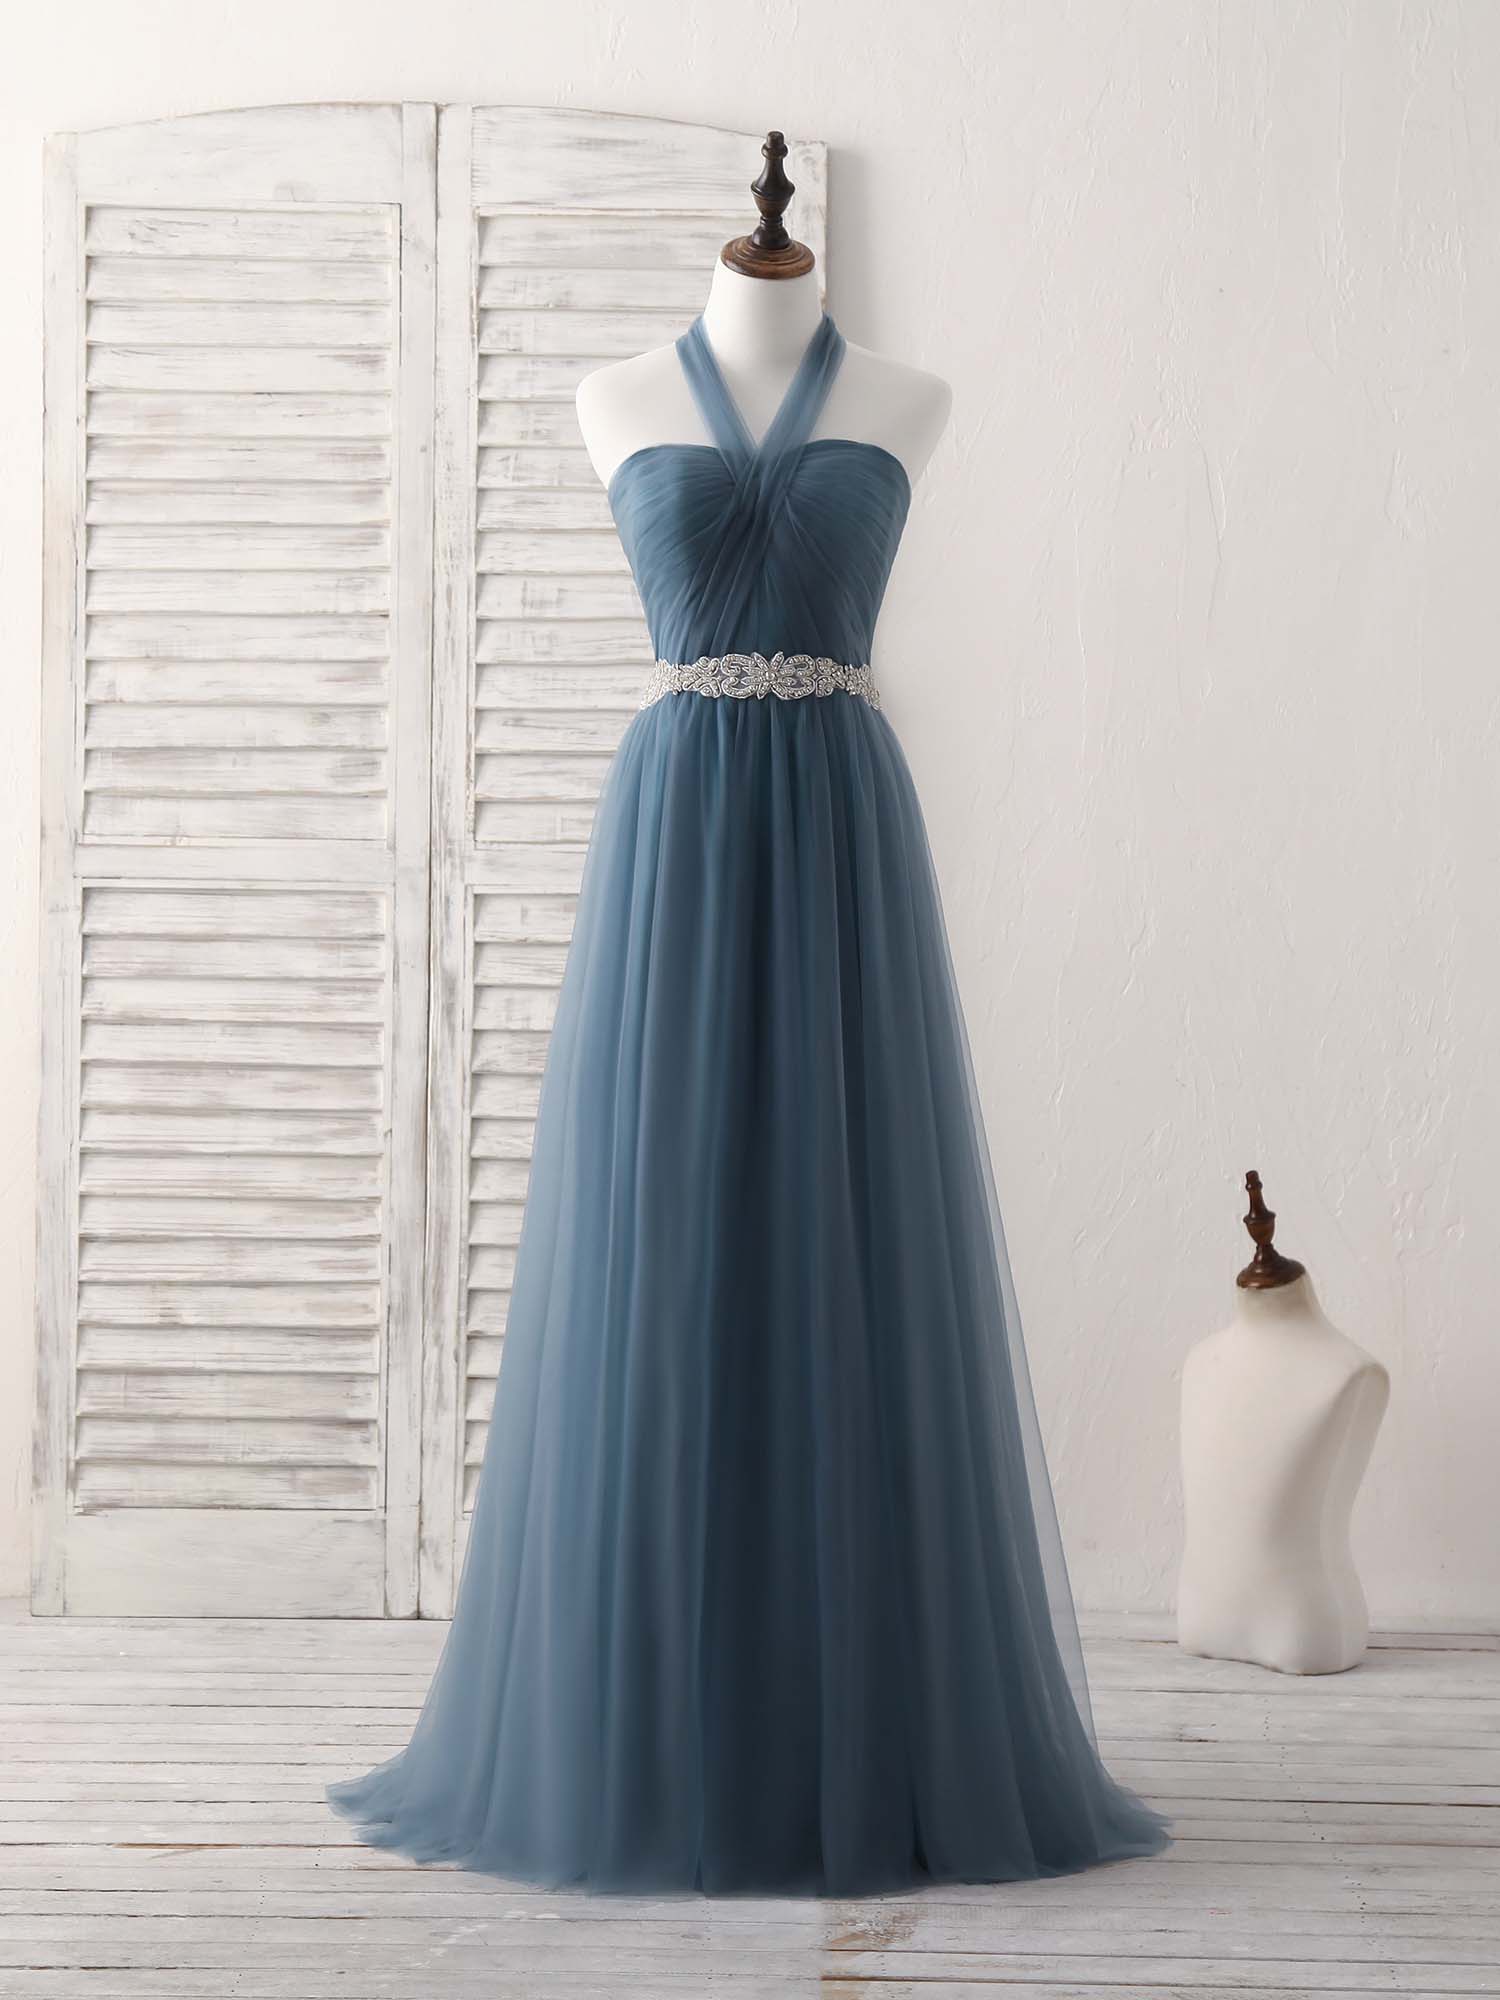 A-Line Gray Blue Tulle Long Bridesmaid Dress Outfits For Women Gray Blue Prom Dress